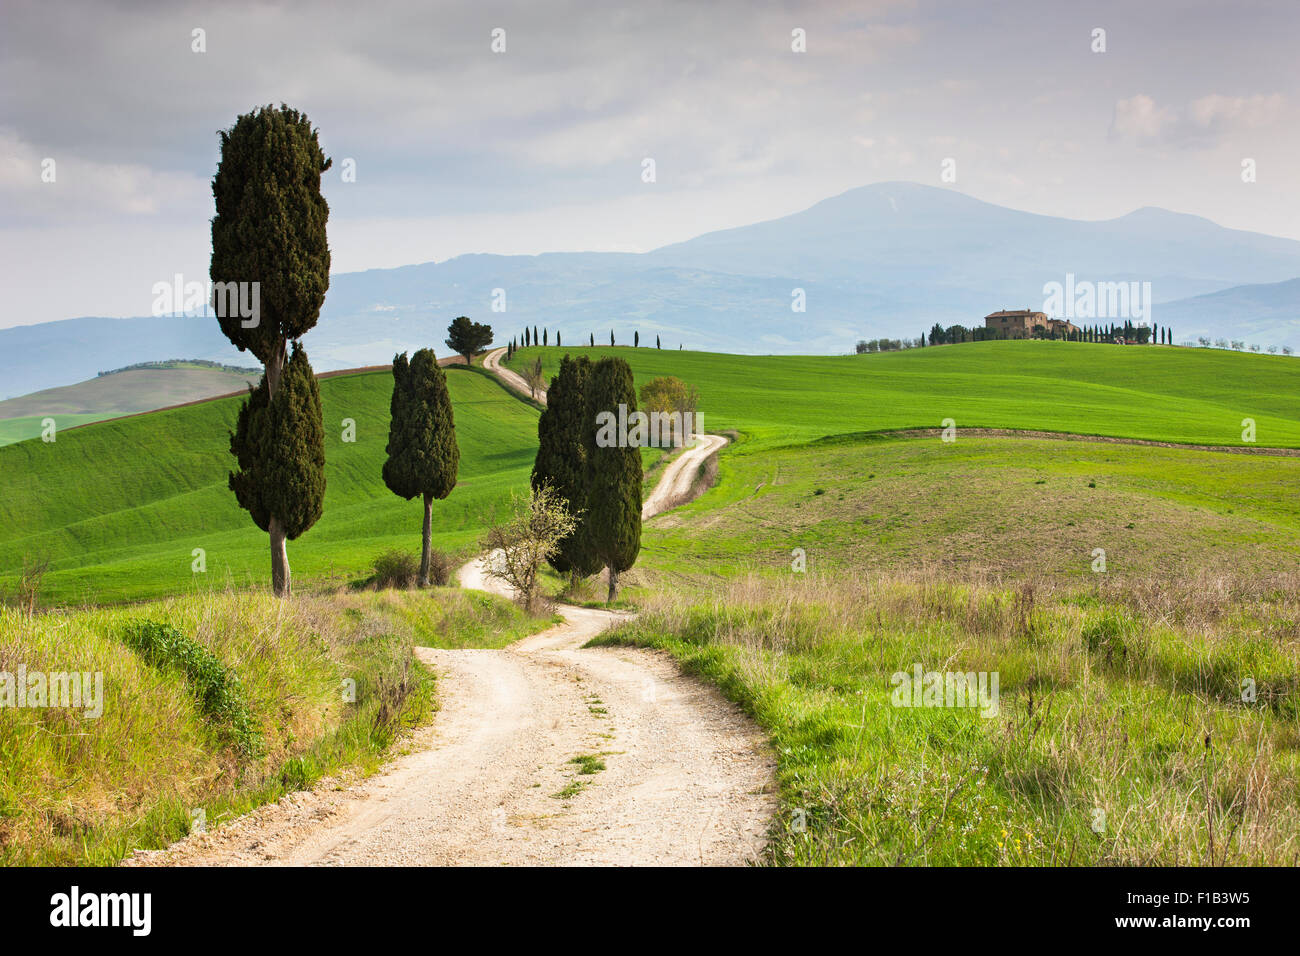 Tuscan landscape with cypress trees along a country lane, in Pienza, Val d'Orcia, Tuscany, Province of Siena, Italy Stock Photo